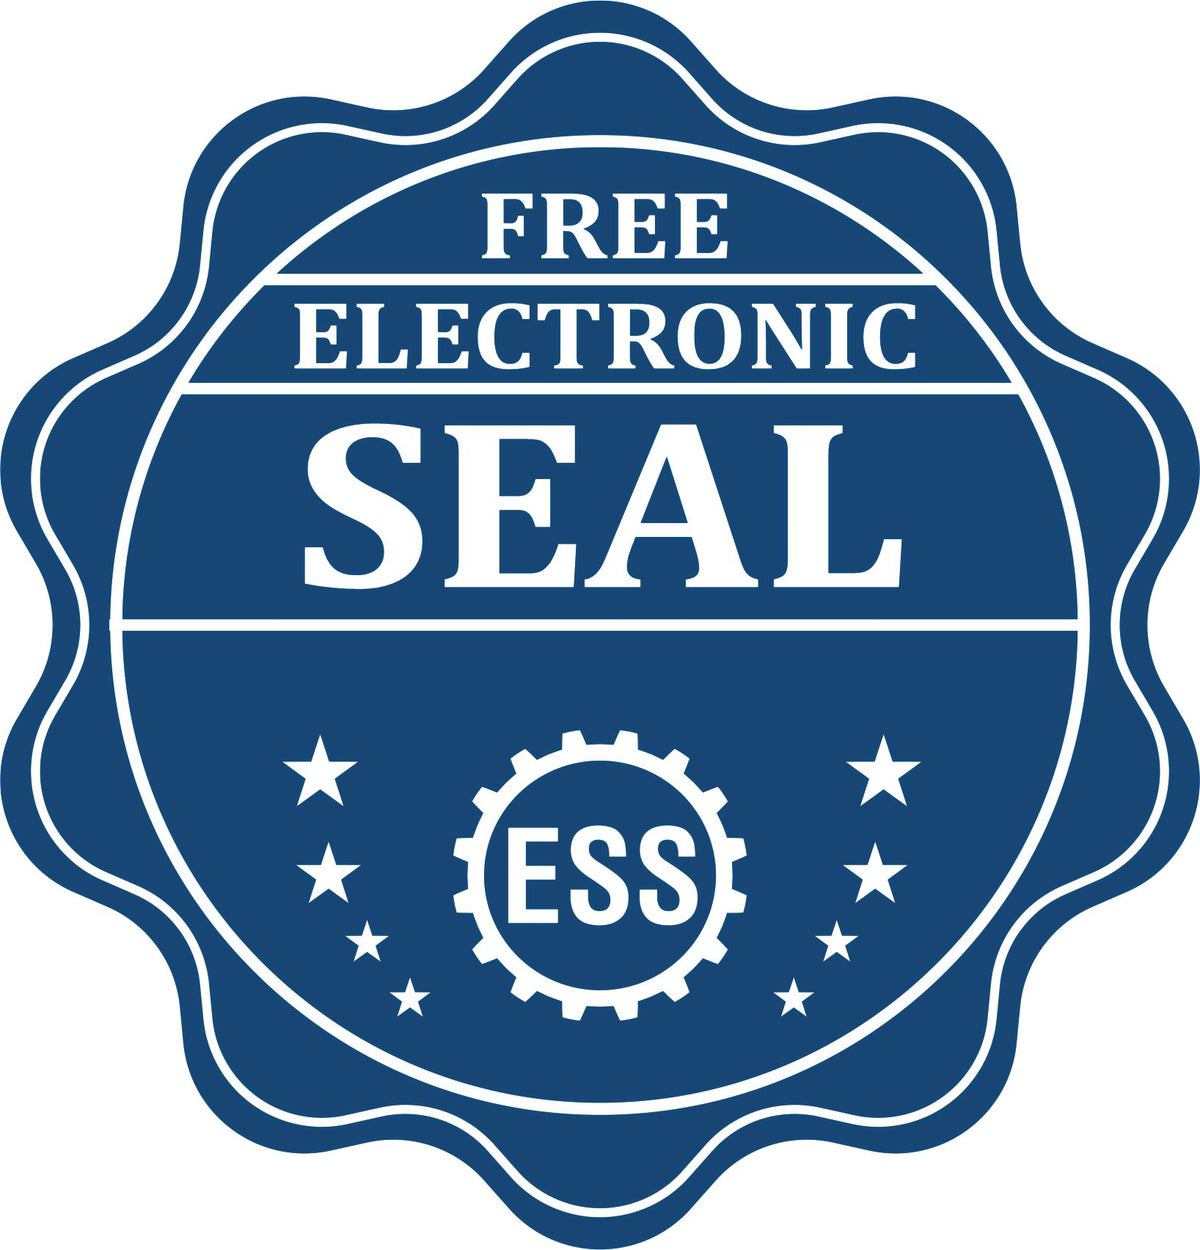 A badge showing a free electronic seal for the Heavy Duty Cast Iron Pennsylvania Geologist Seal Embosser with stars and the ESS gear on the emblem.